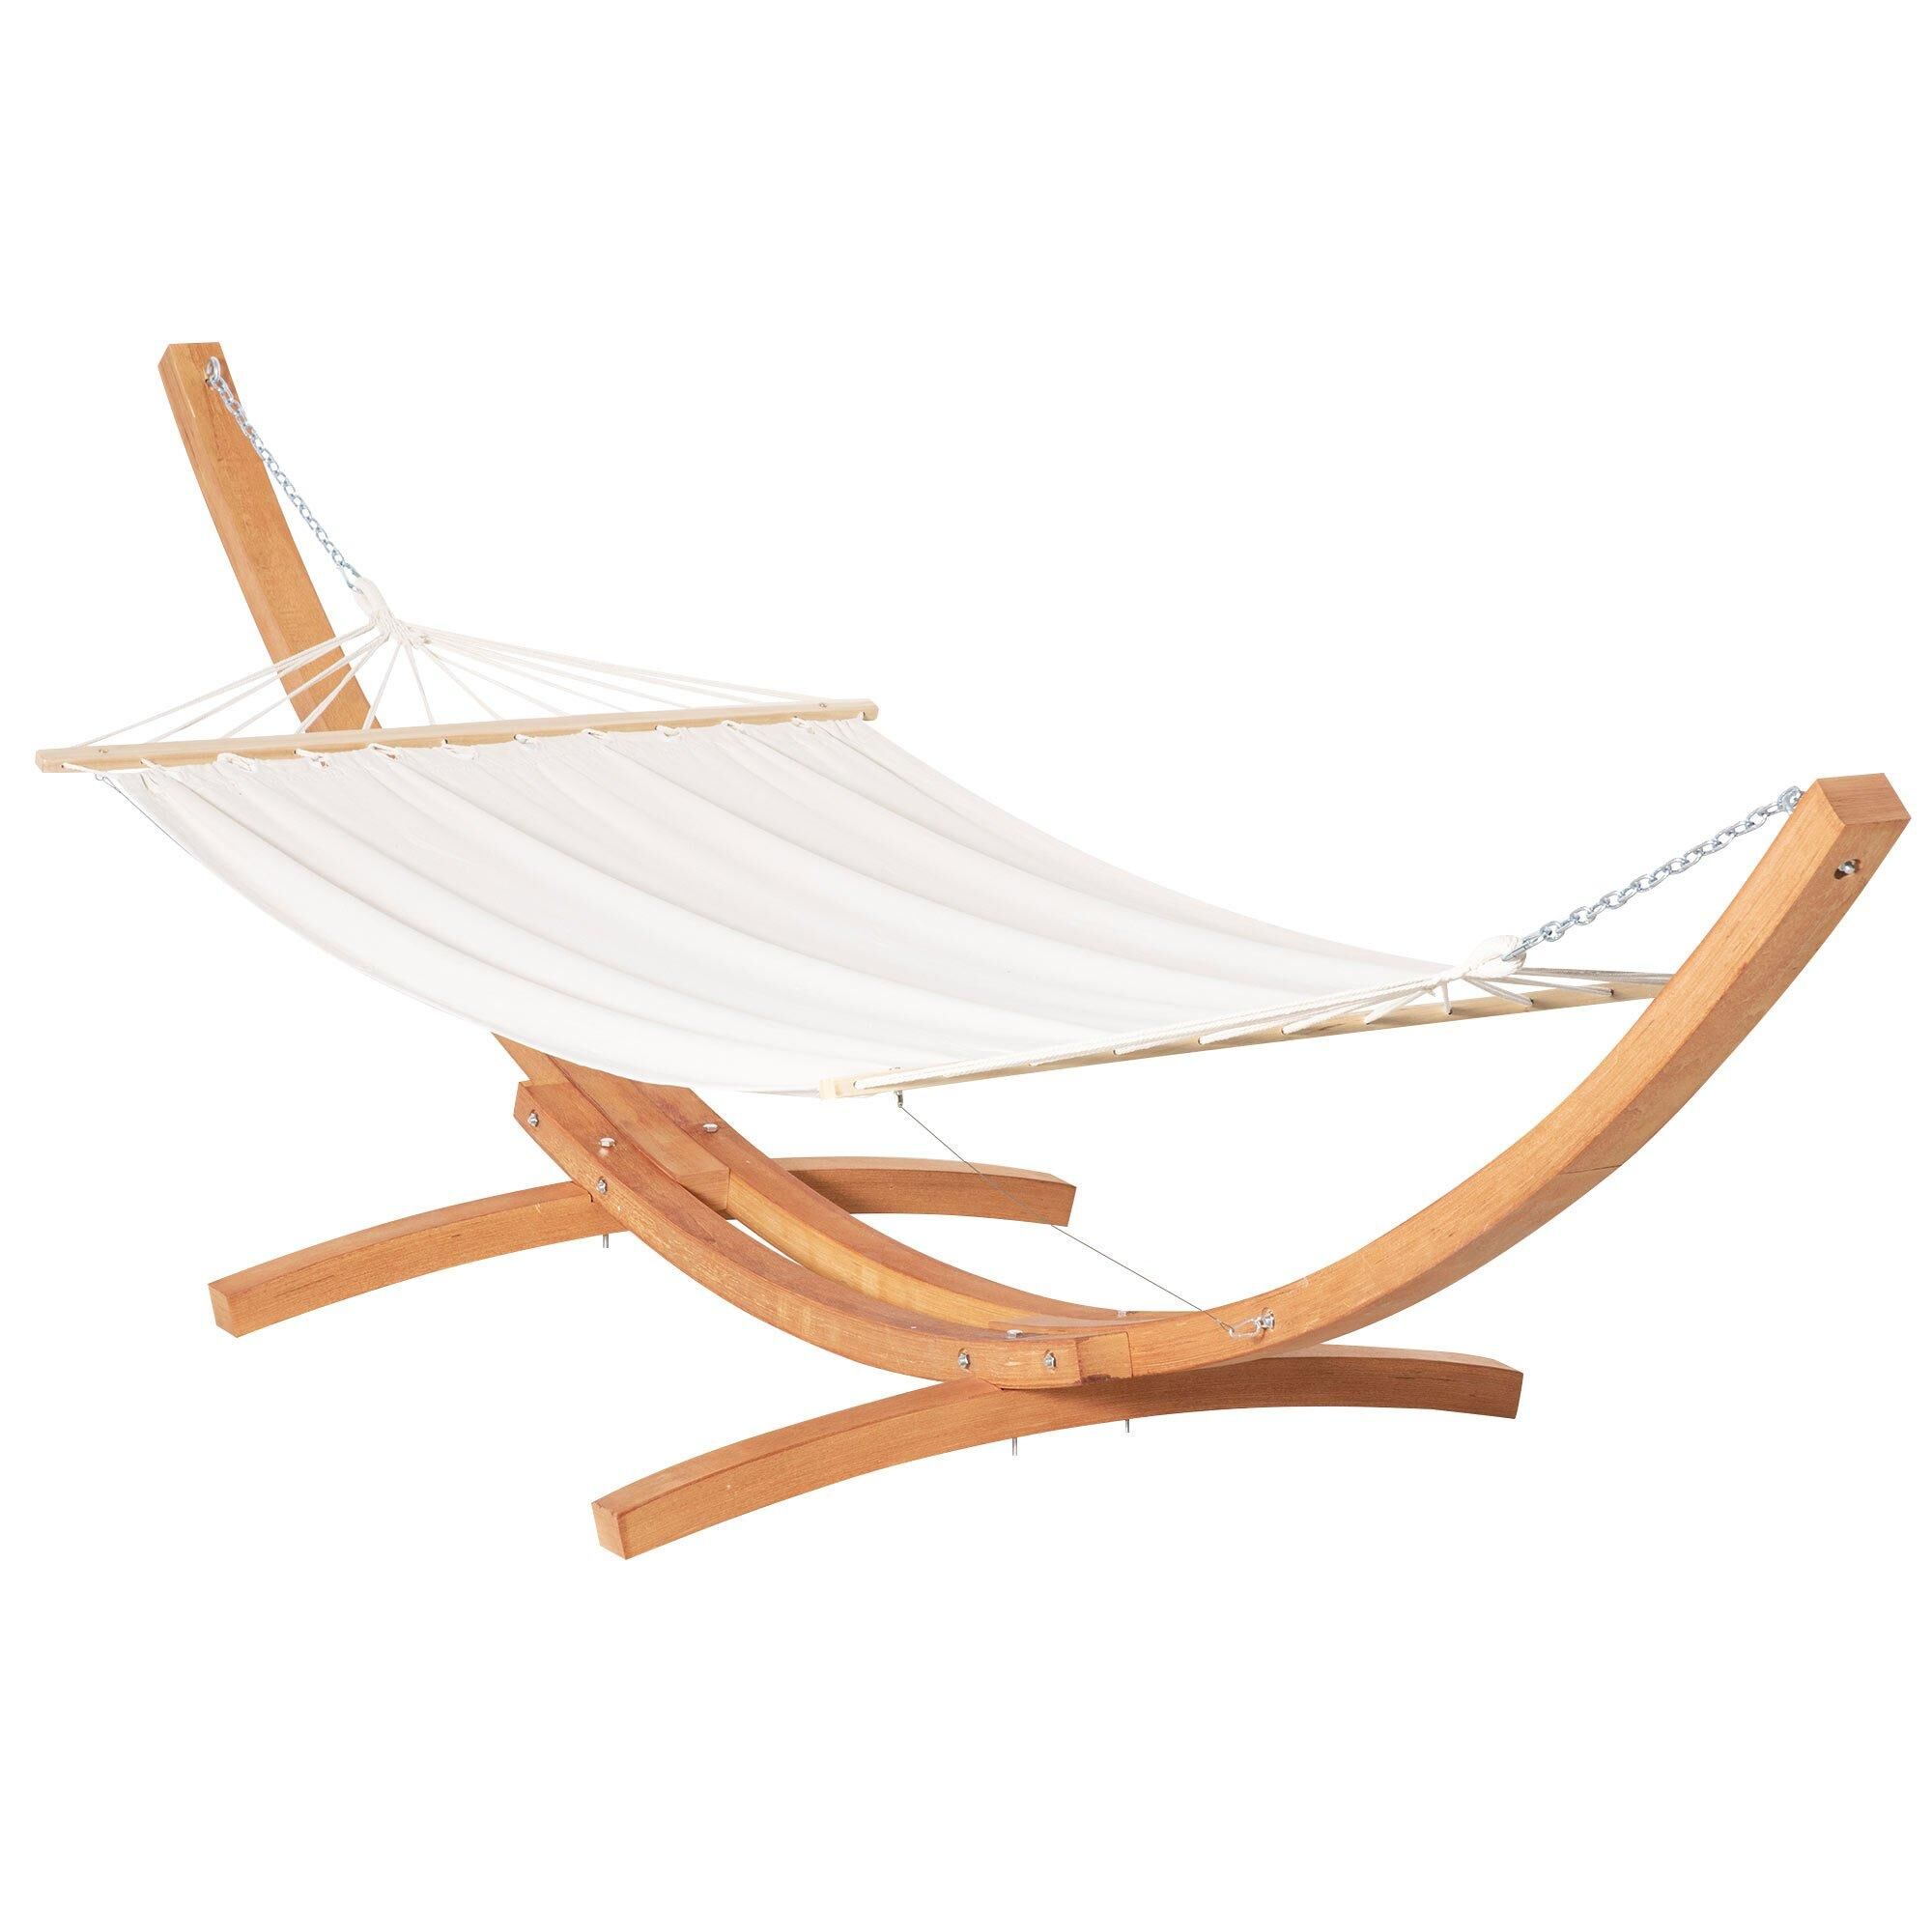 Outsunny Outdoor Garden Hammock Swing Hanging Bed withWooden Stand for Patio